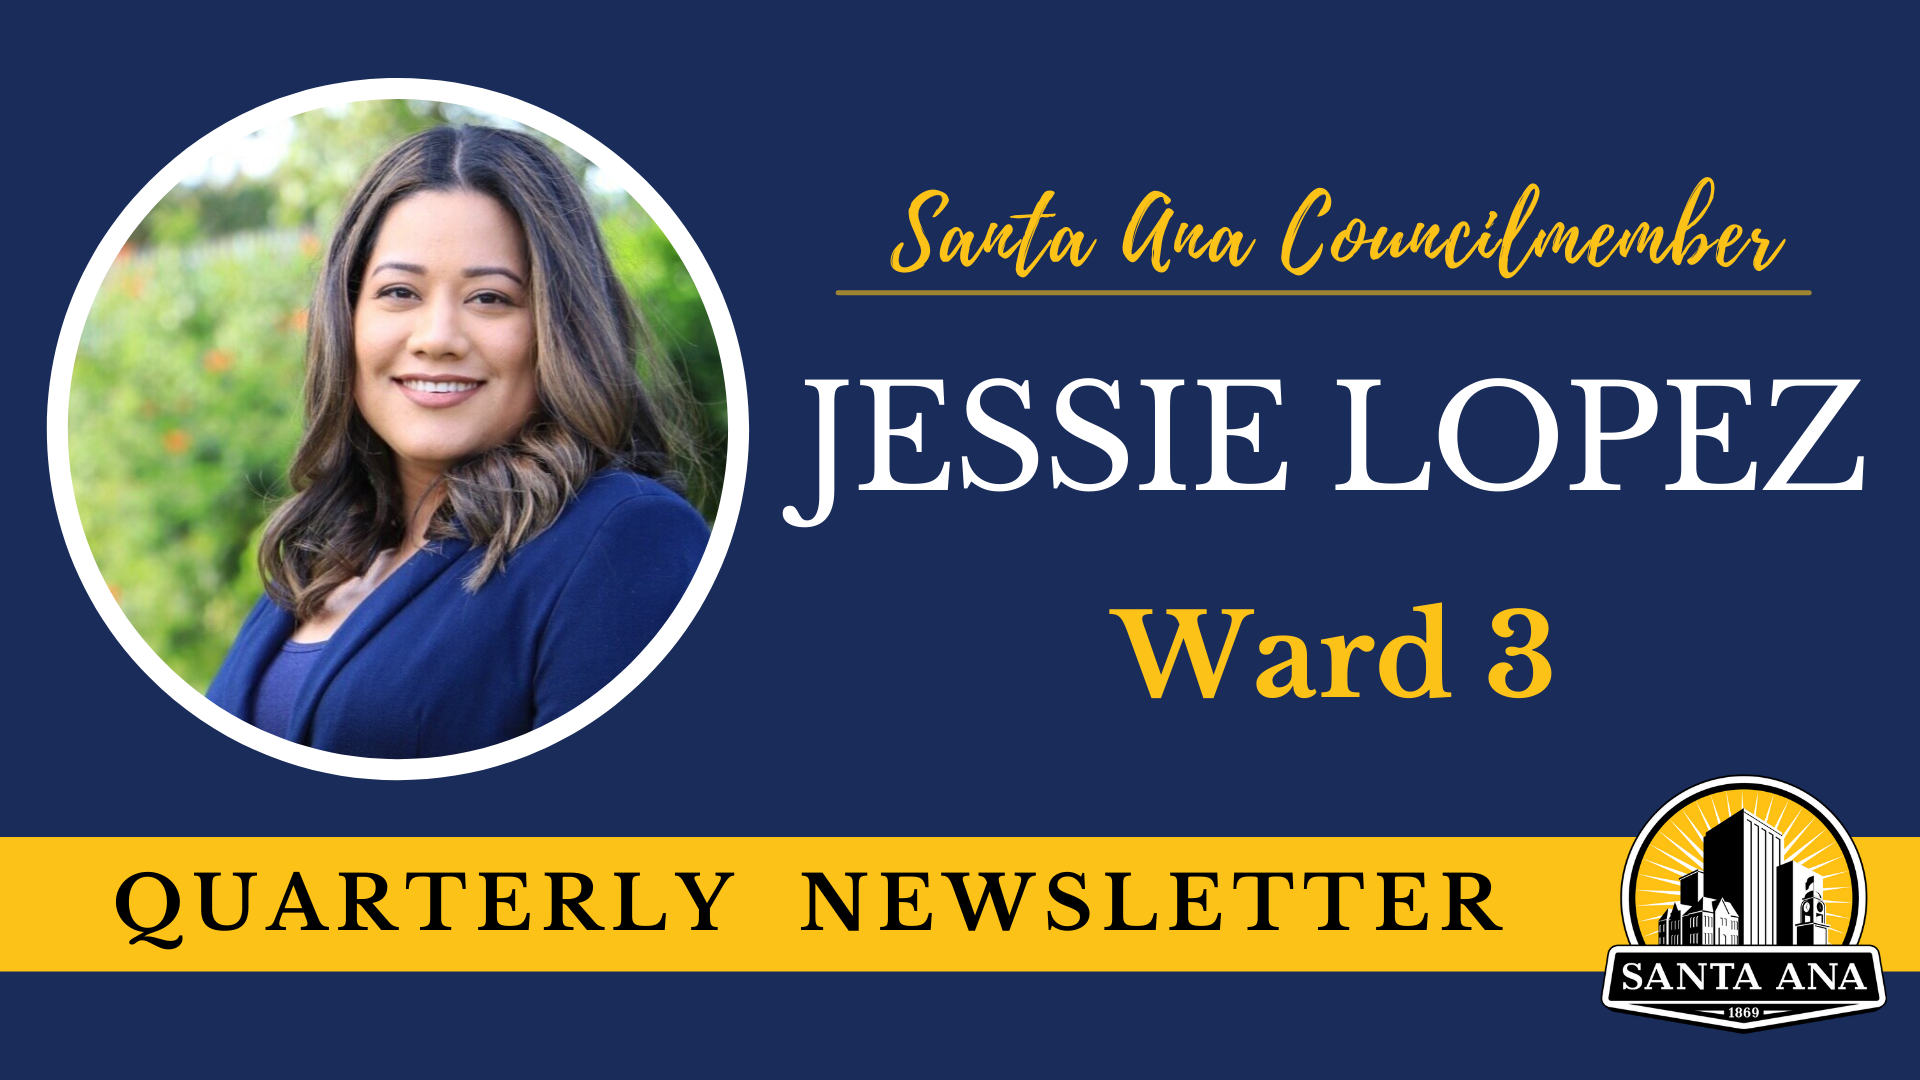 Image reads: Santa Ana Councilmember Jessie Lopez Ward 3 Quarterly Newsletter. Image contains an image of Jessie Lopez and the logo for the City of Santa Ana